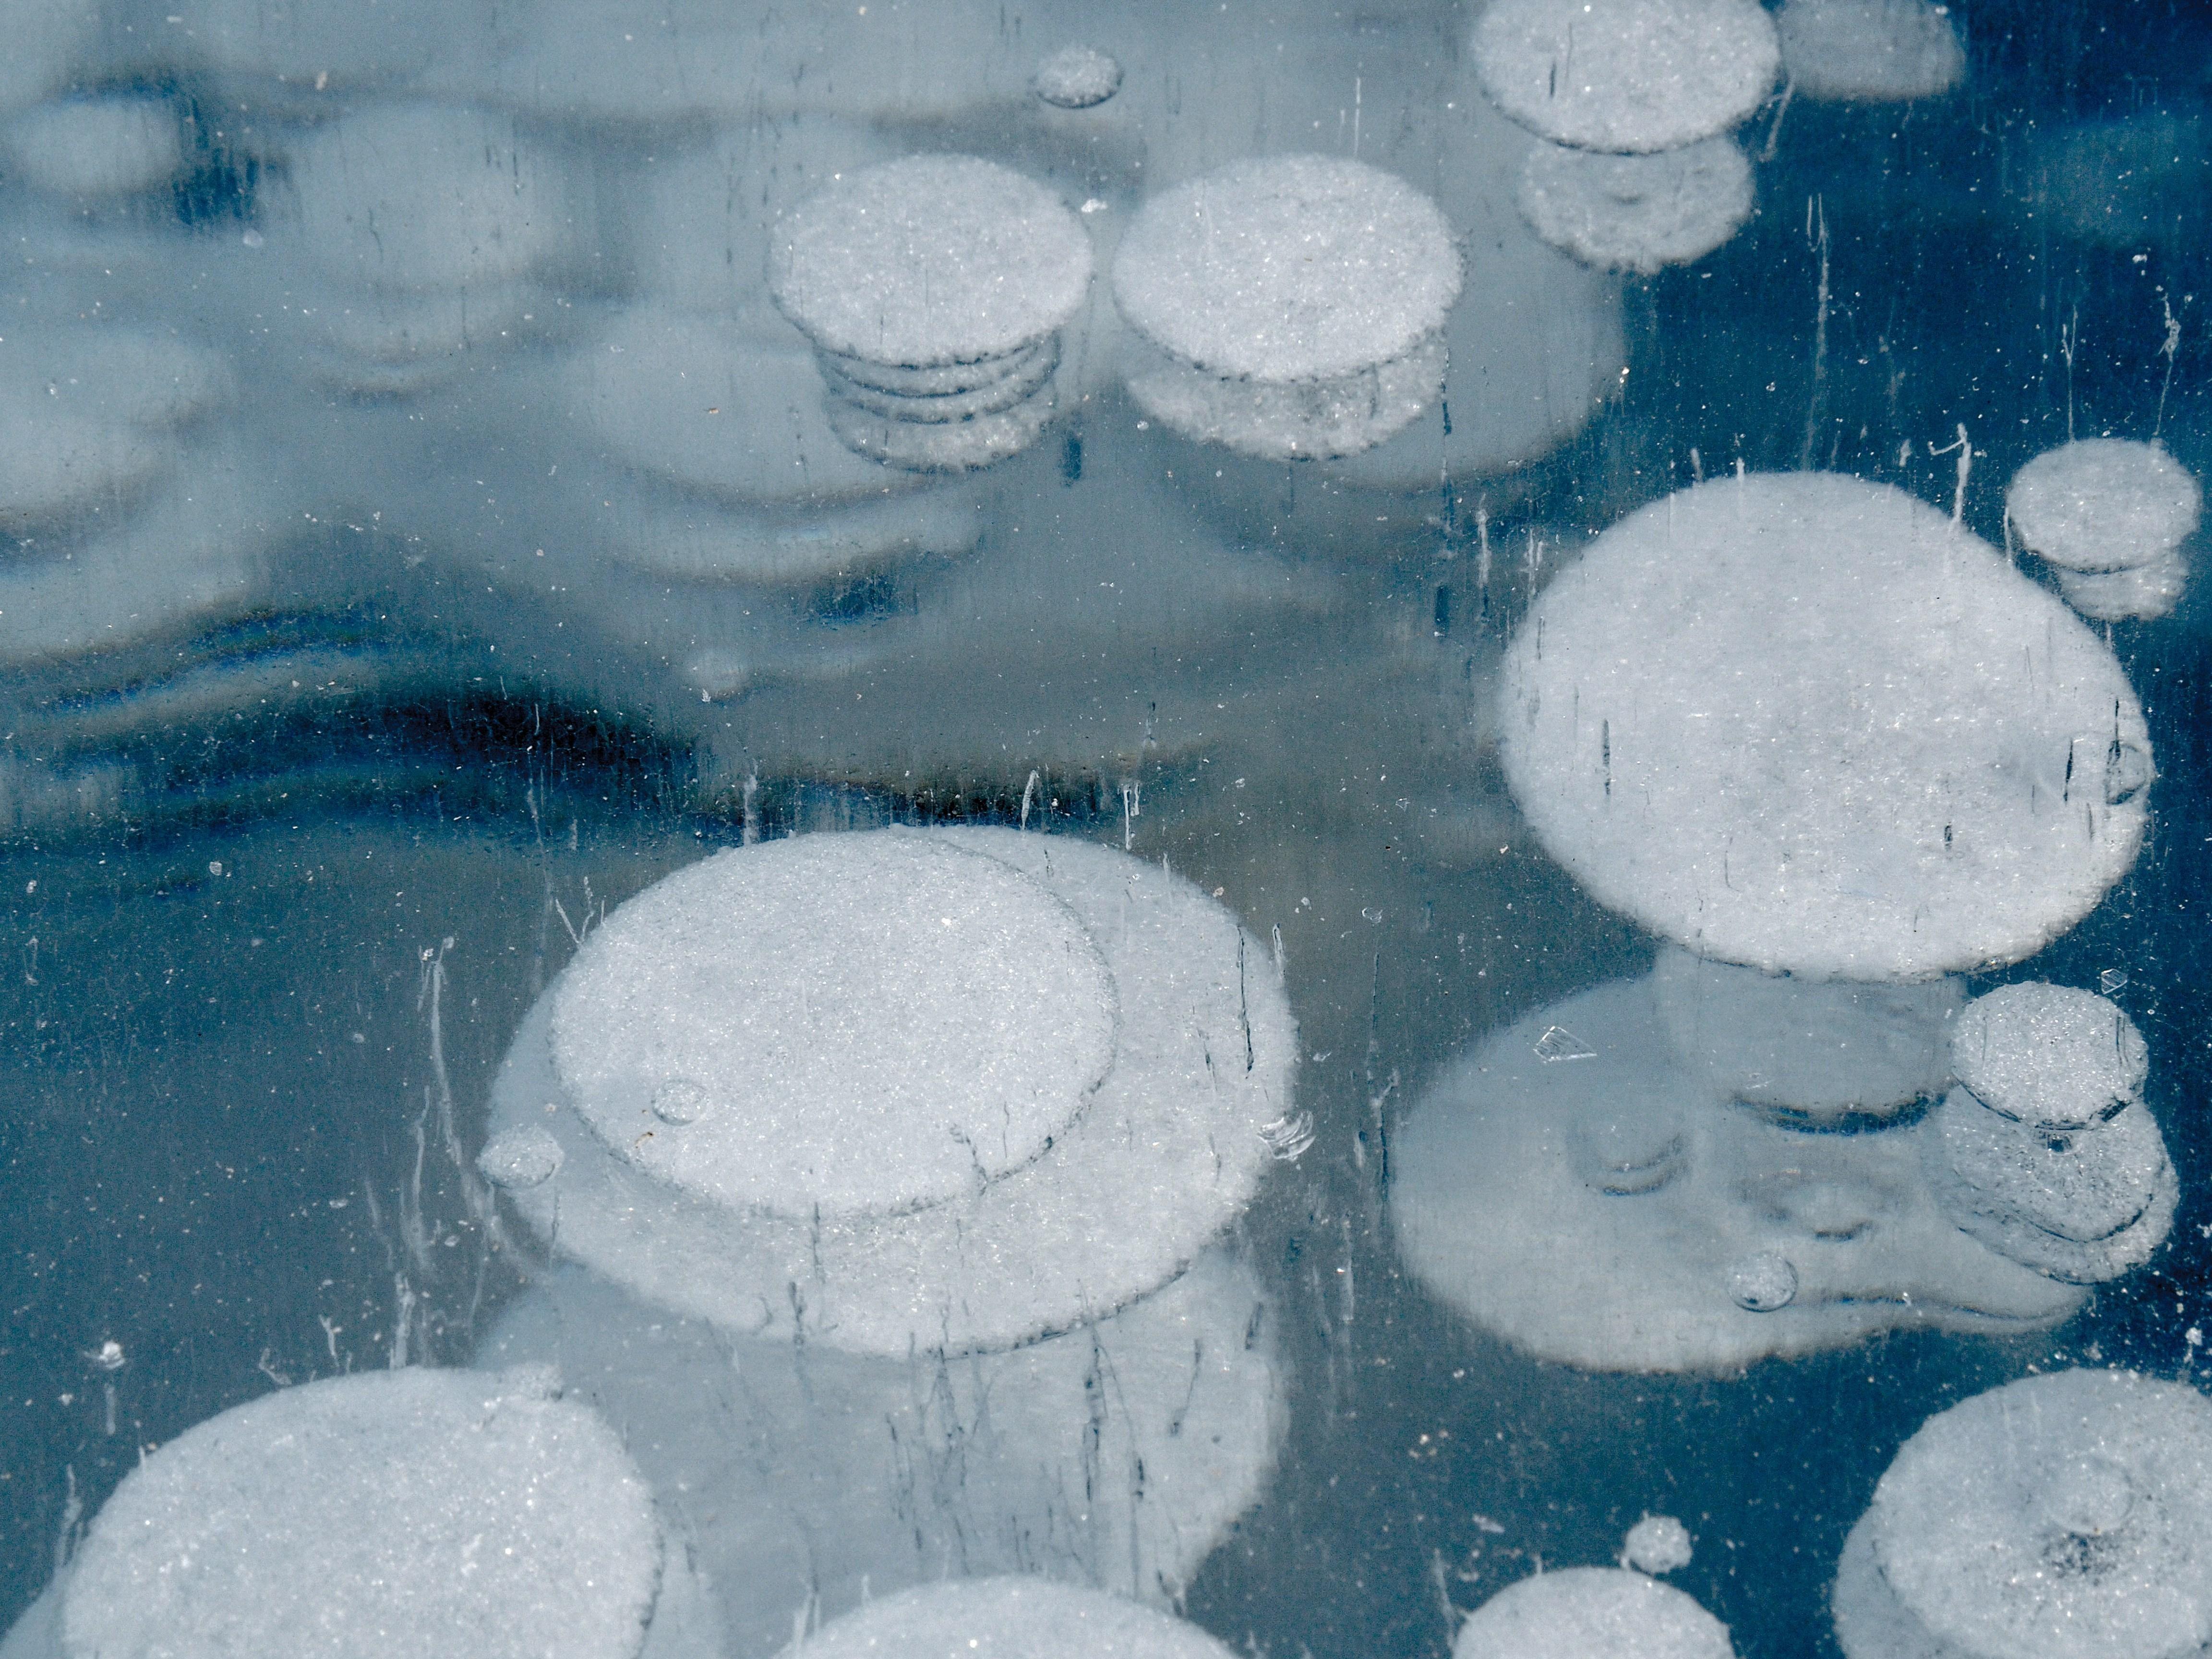 A day trip to Abraham Lake.Frozen bubbles are calling's